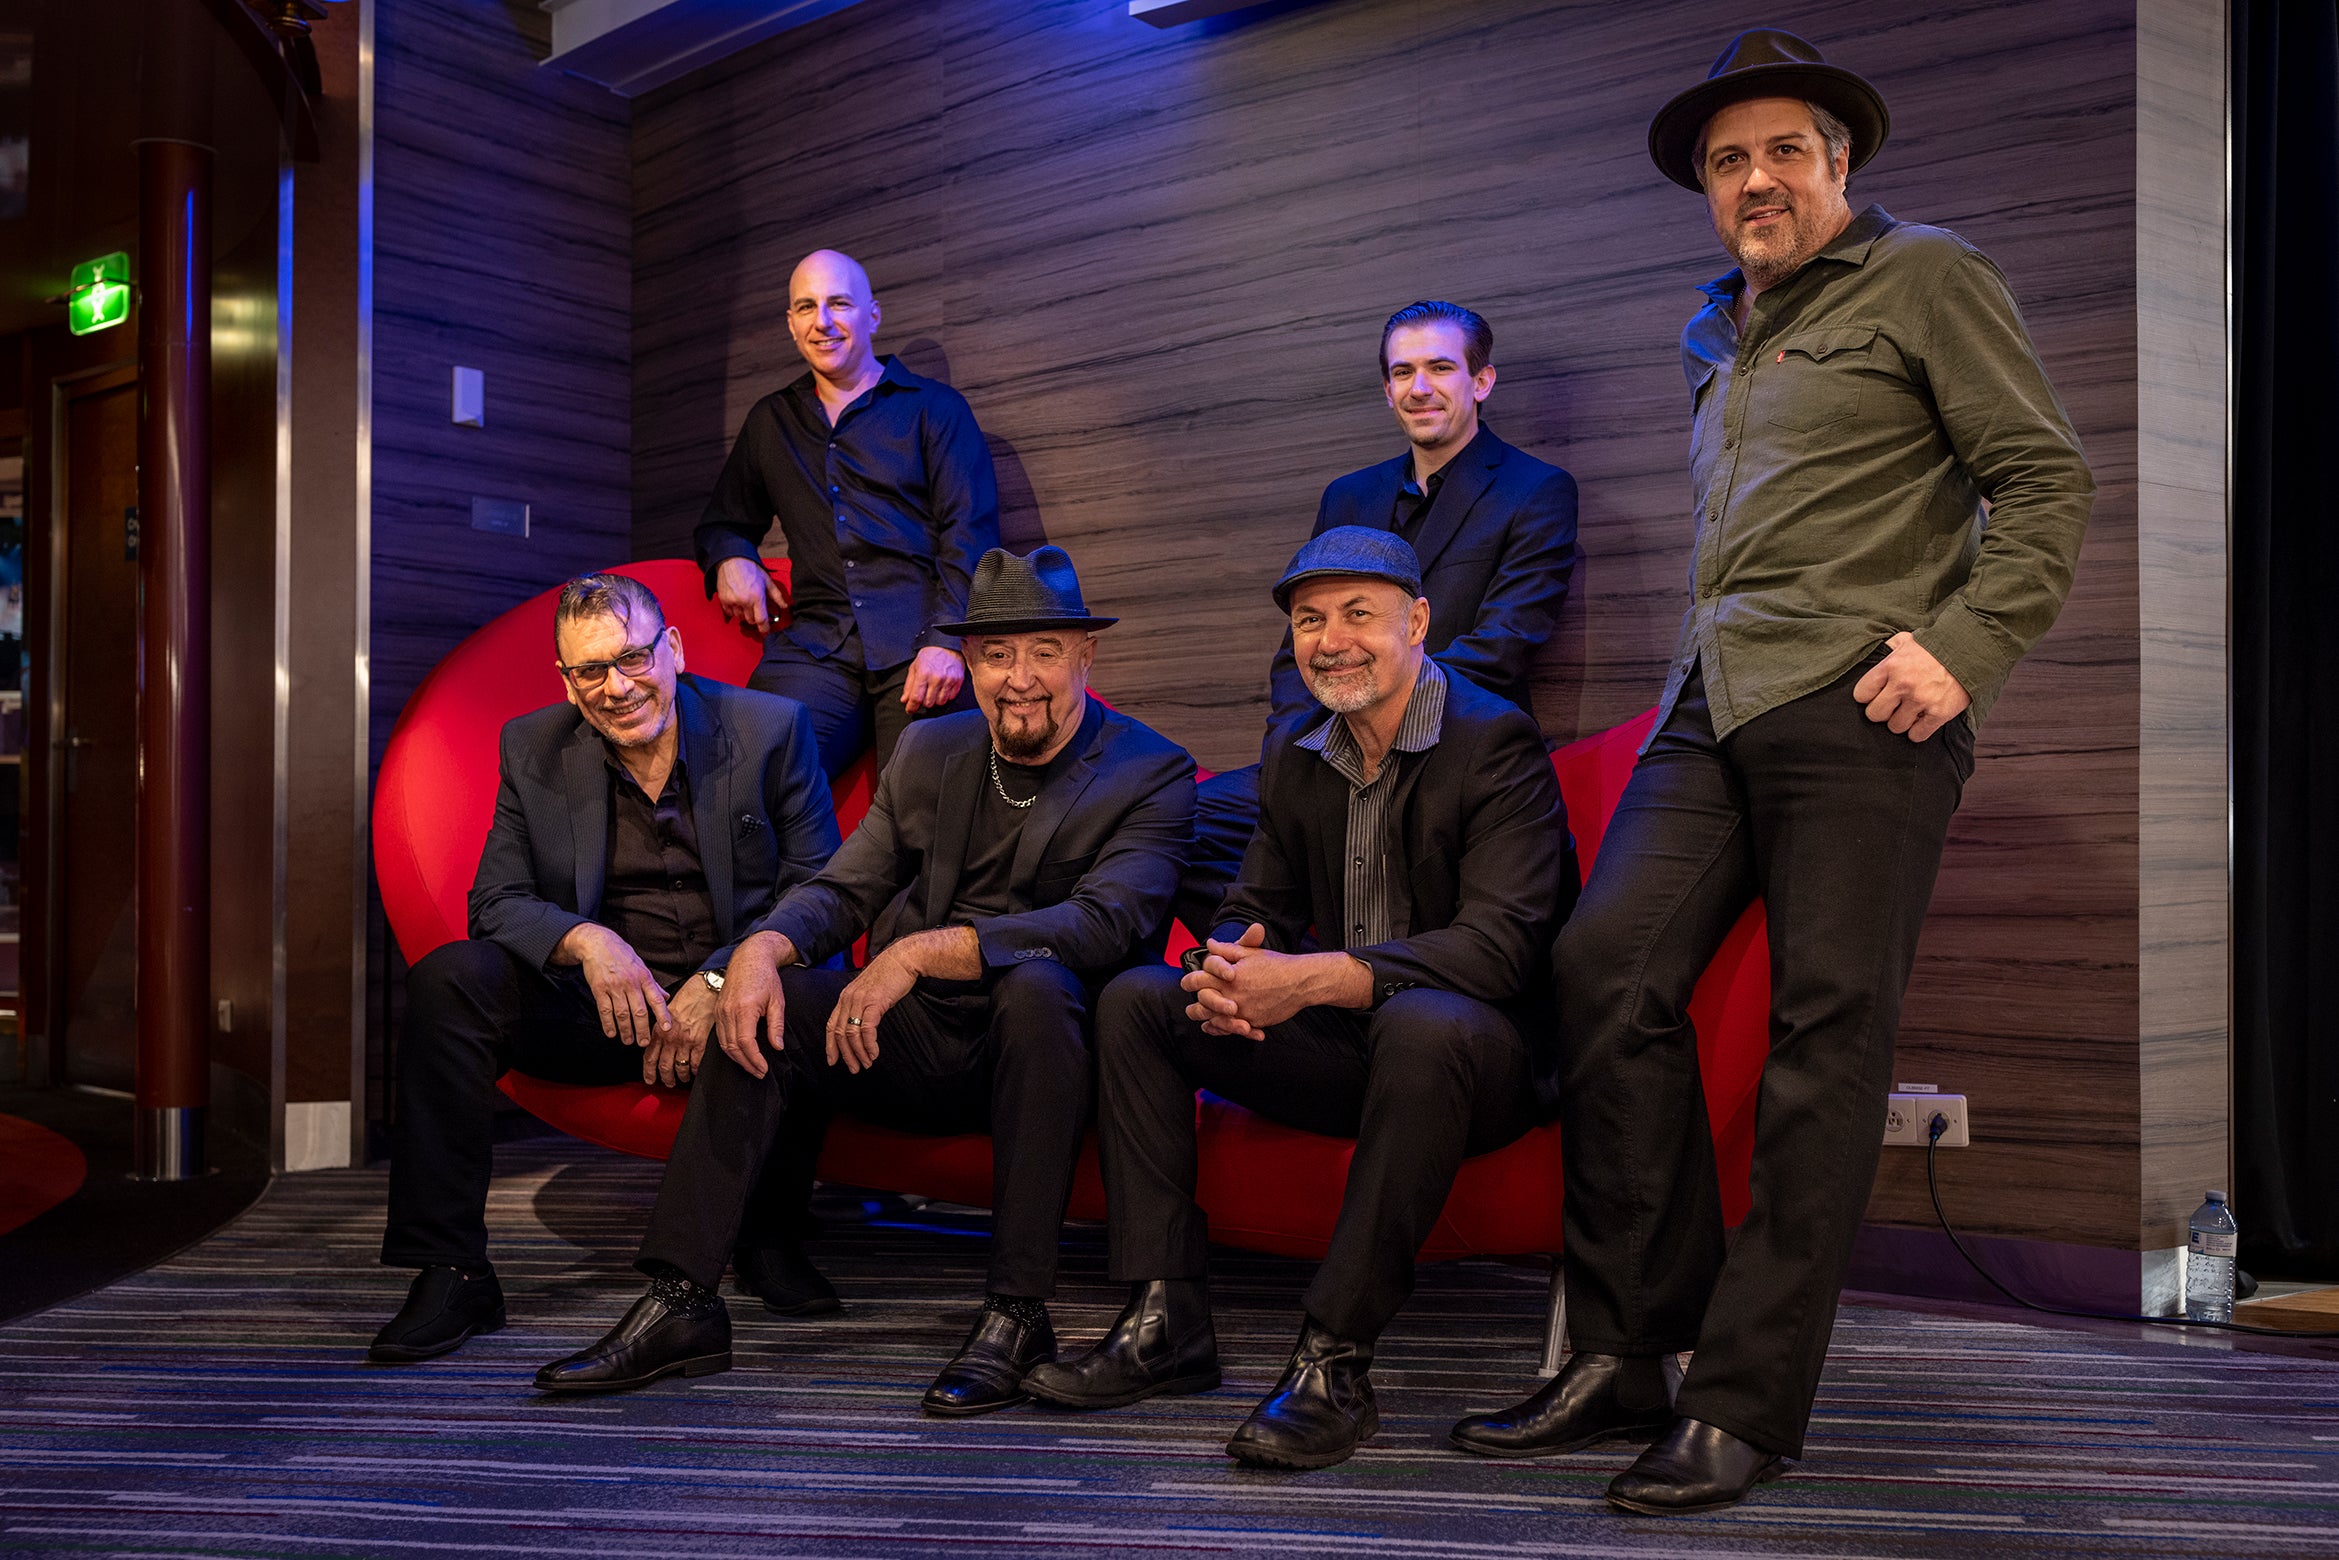 Fabulous Thunderbirds at Tower Theatre - OR